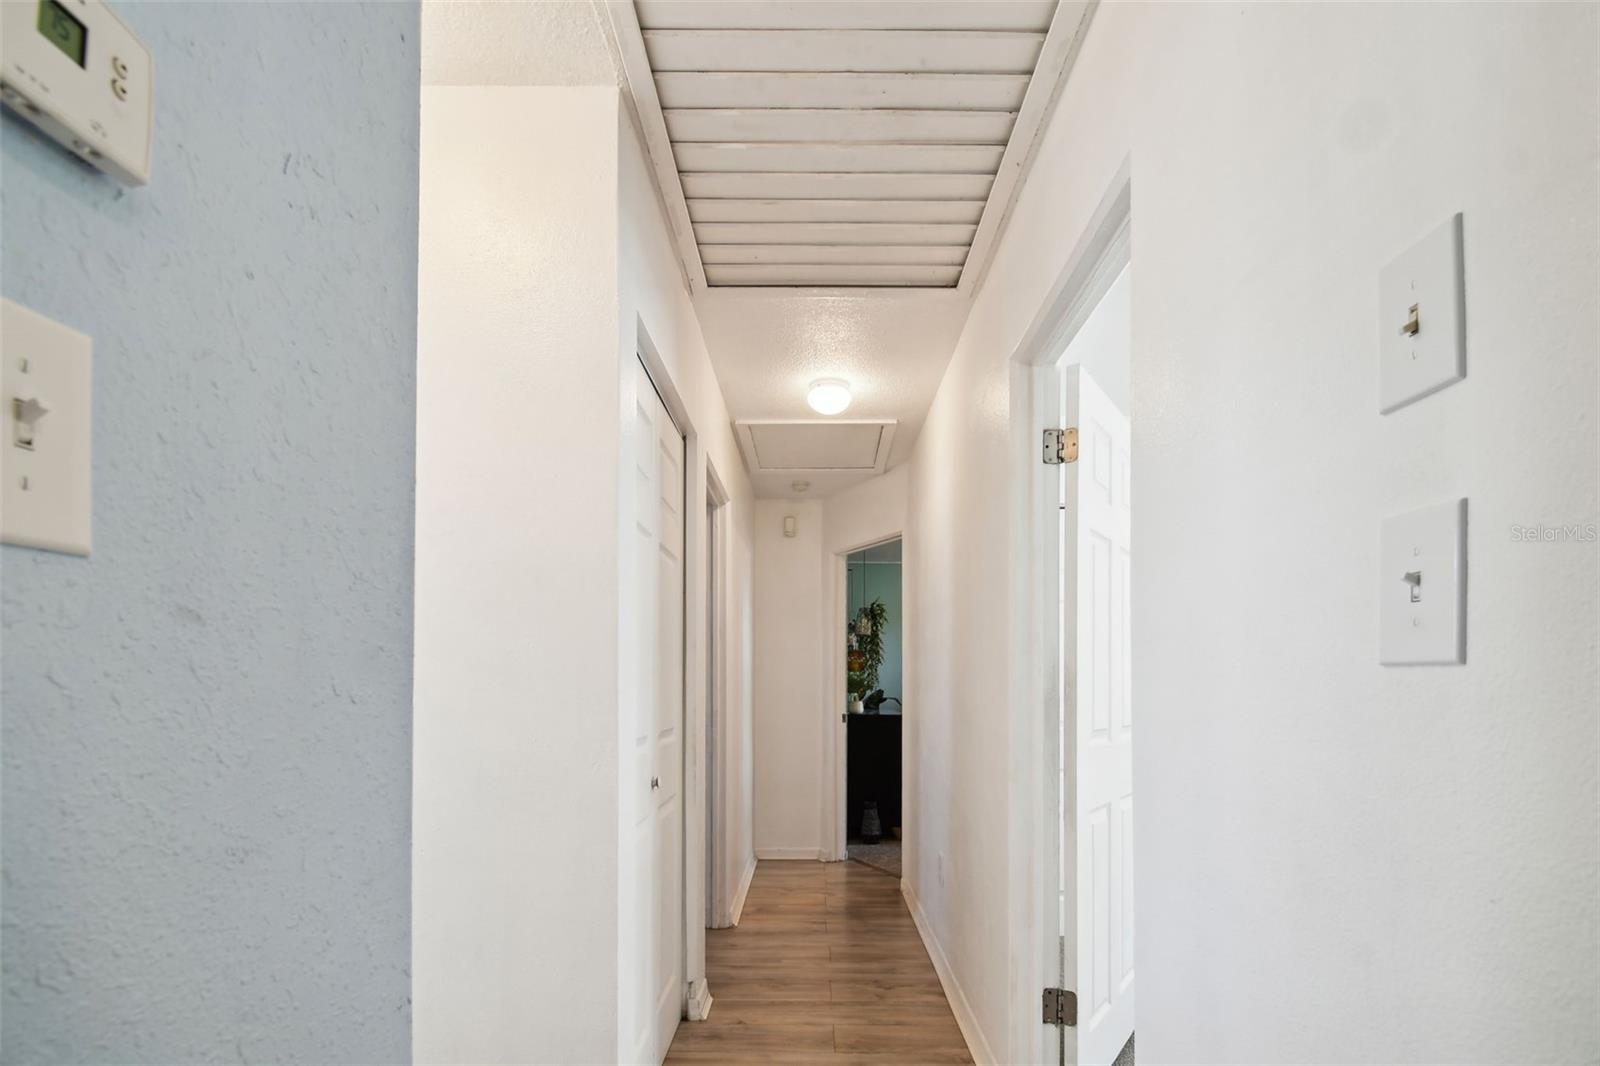 View of Hallway and Whole House Fan